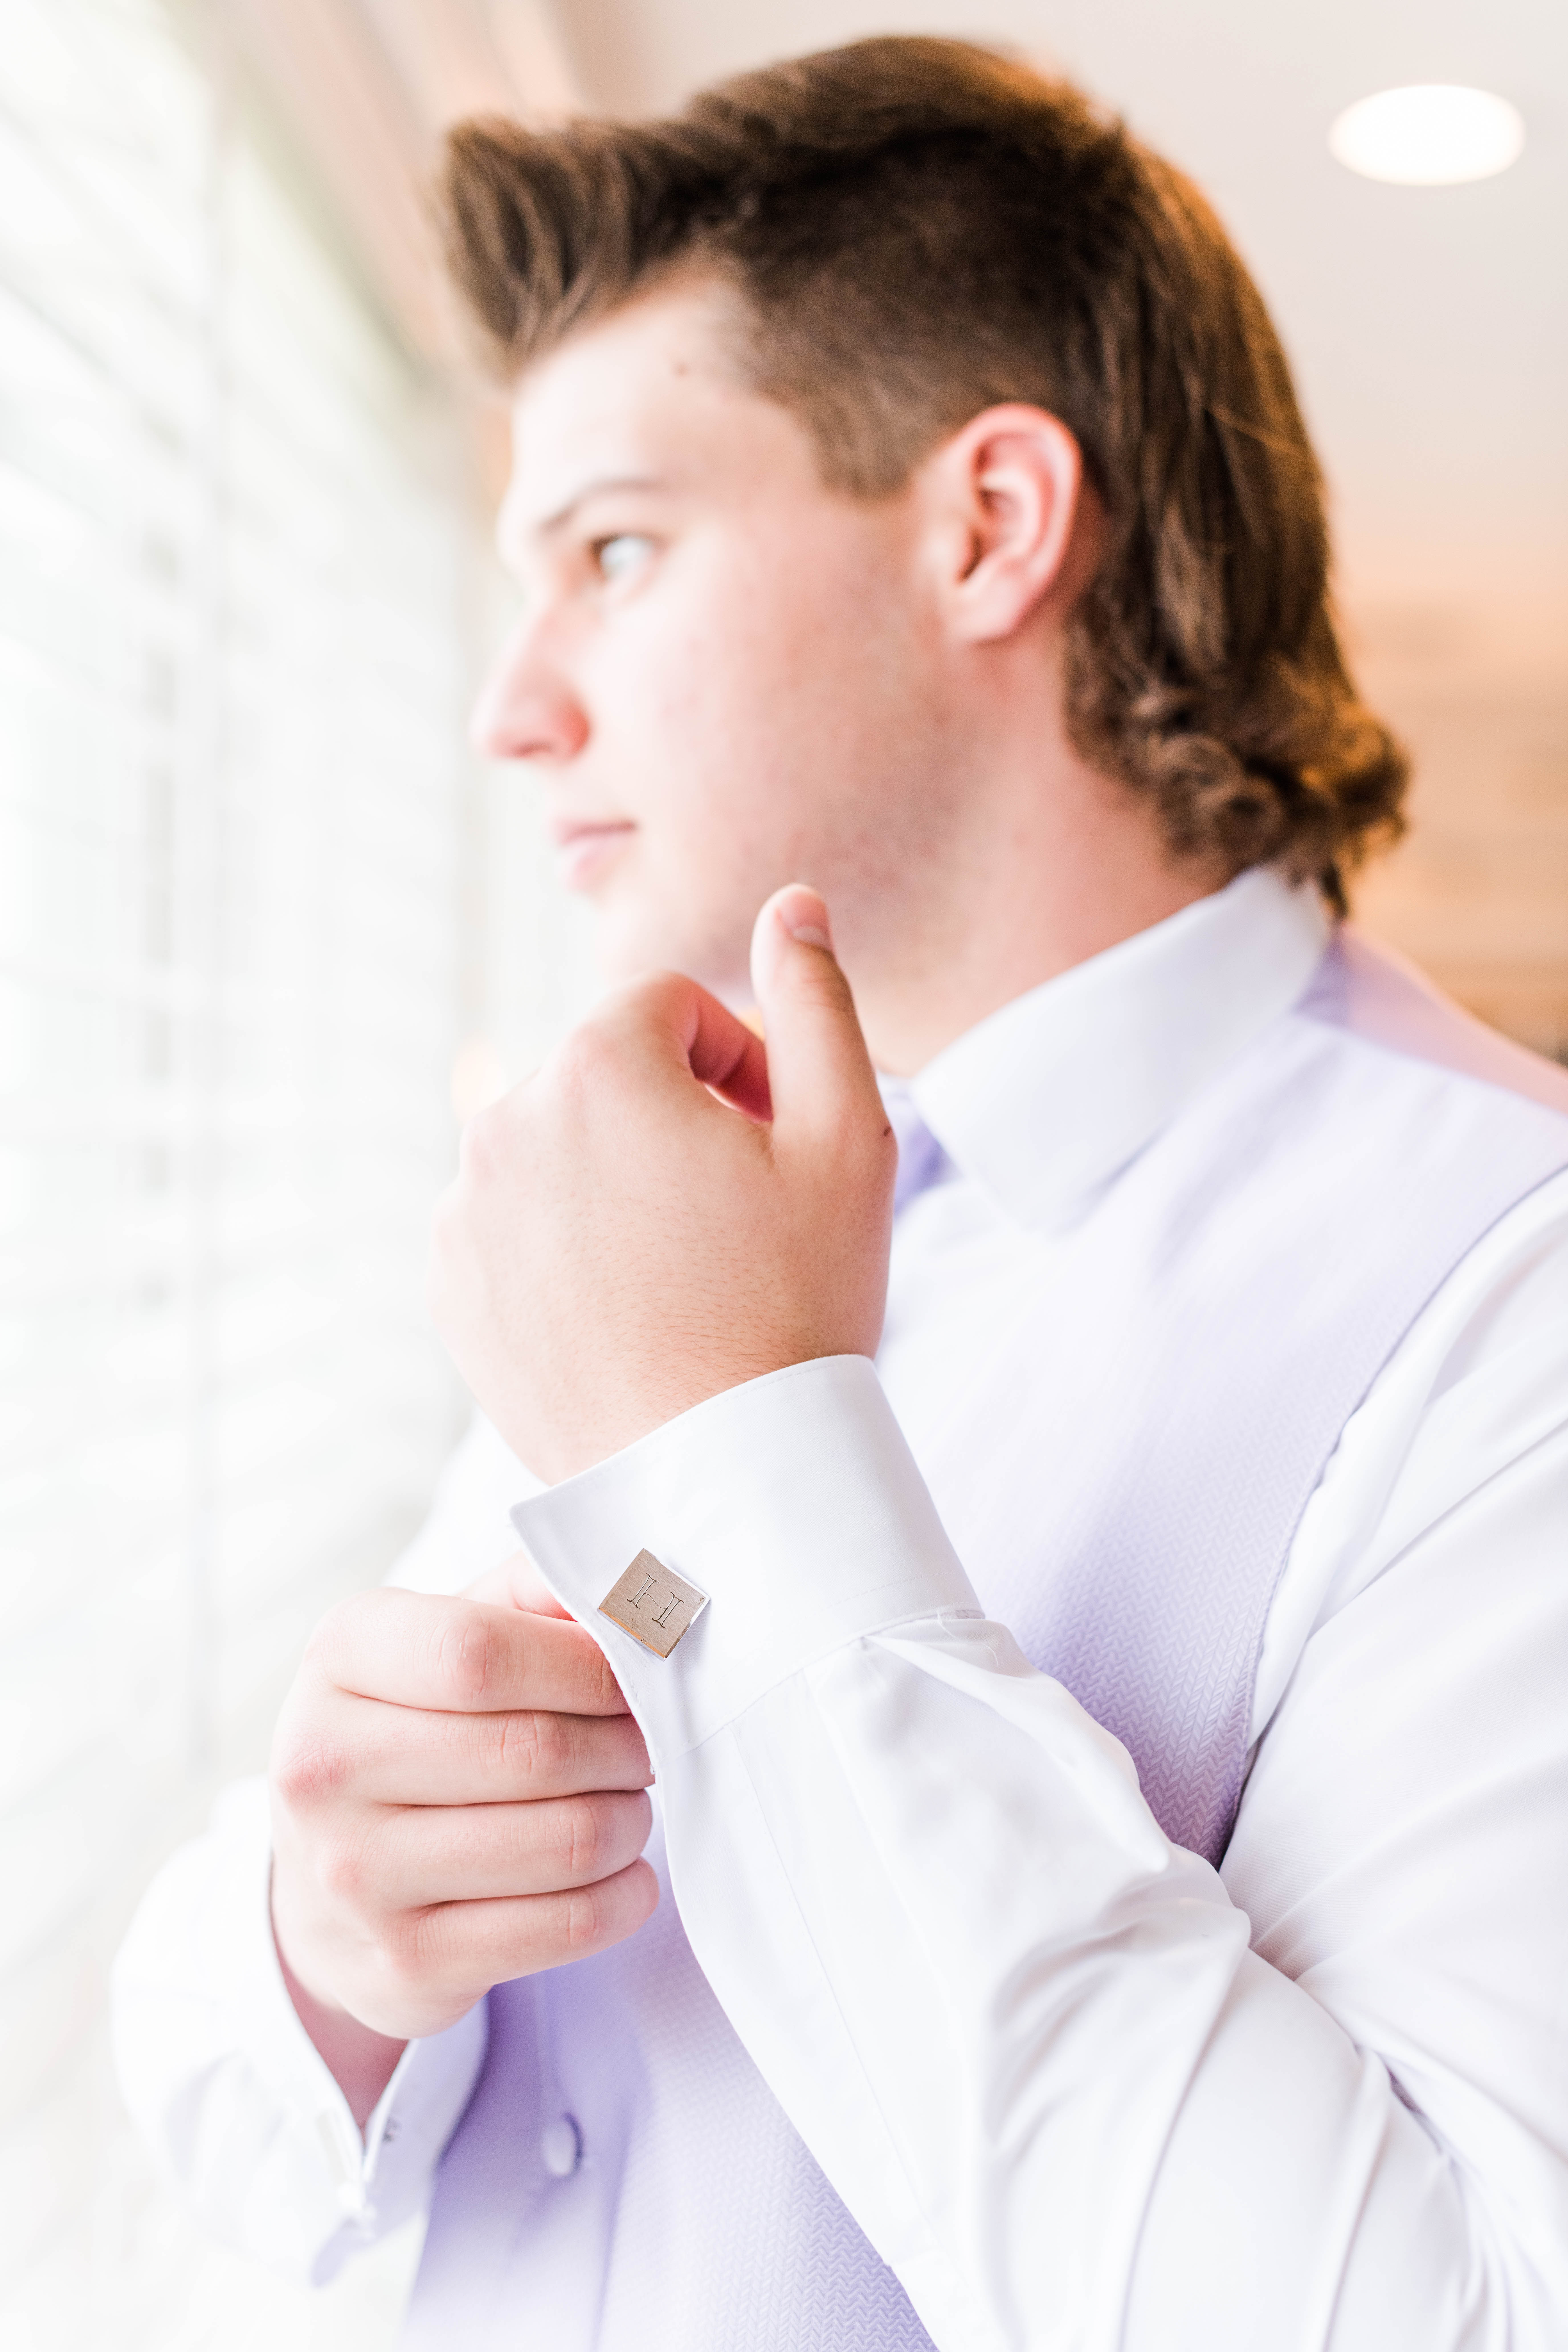 senior man adjusting his cufflink looking out the window